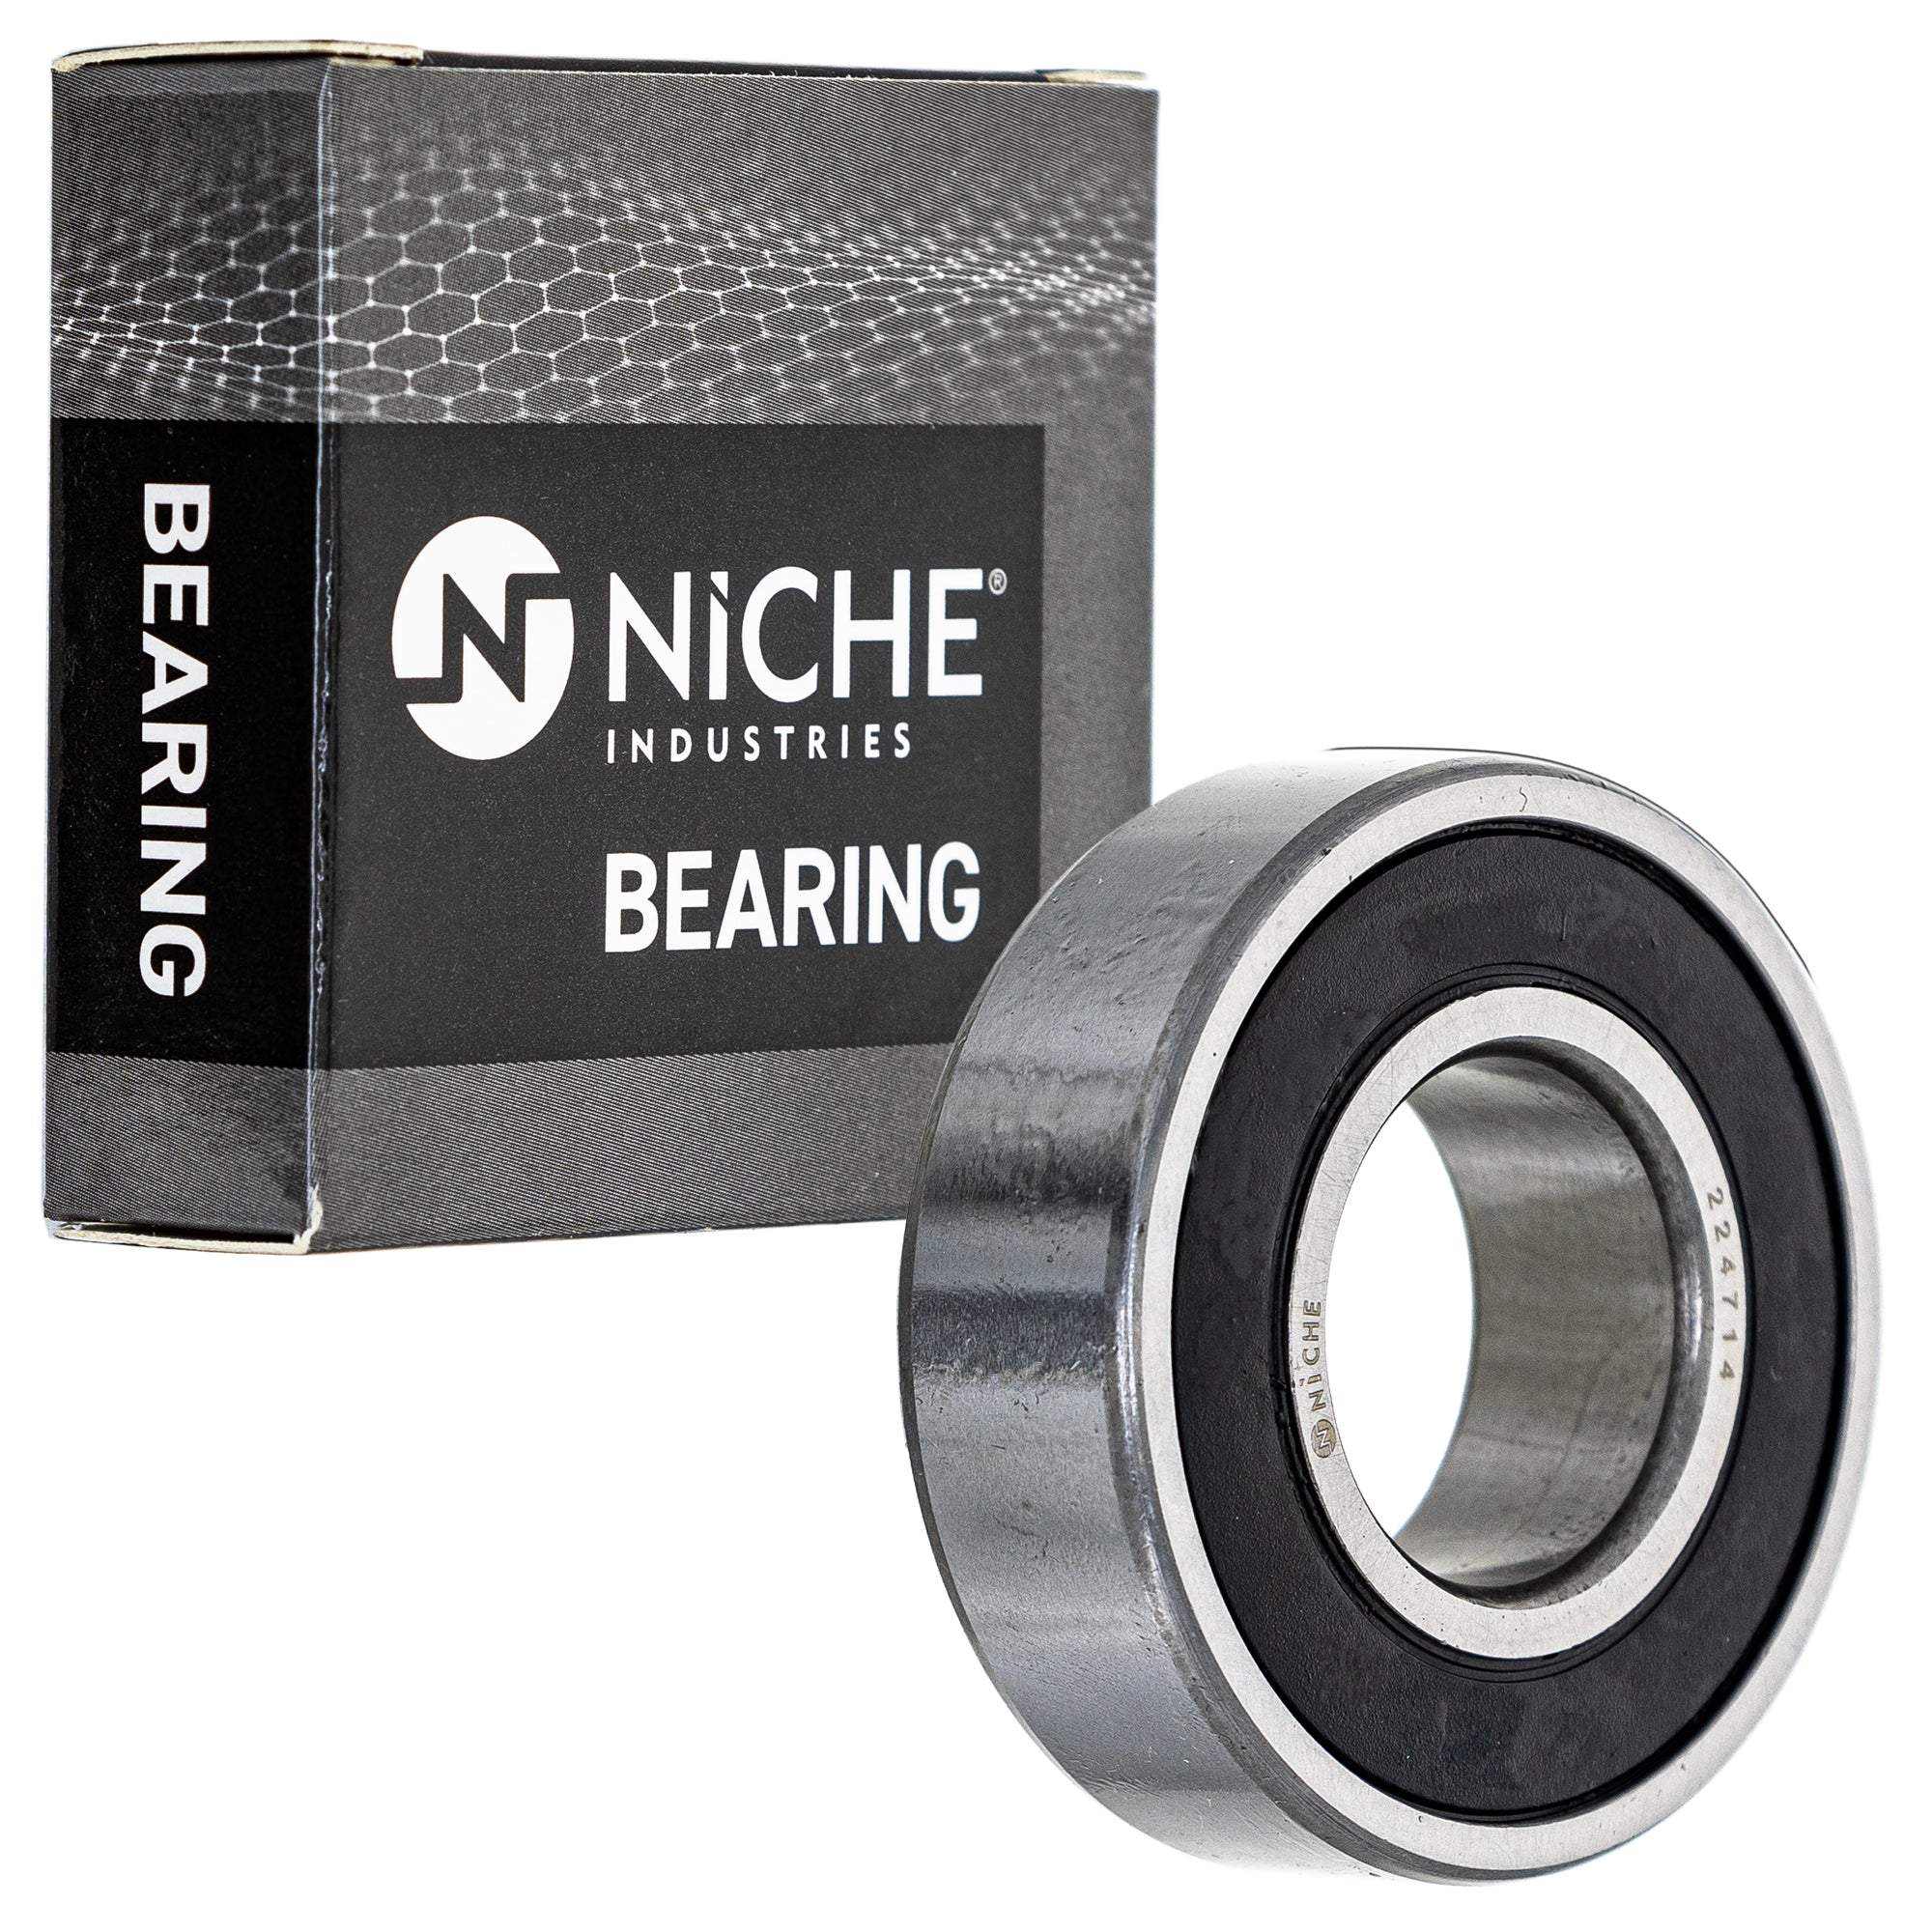 NICHE 519-CBB2217R Bearing 2-Pack for zOTHER Trials Trail Touring